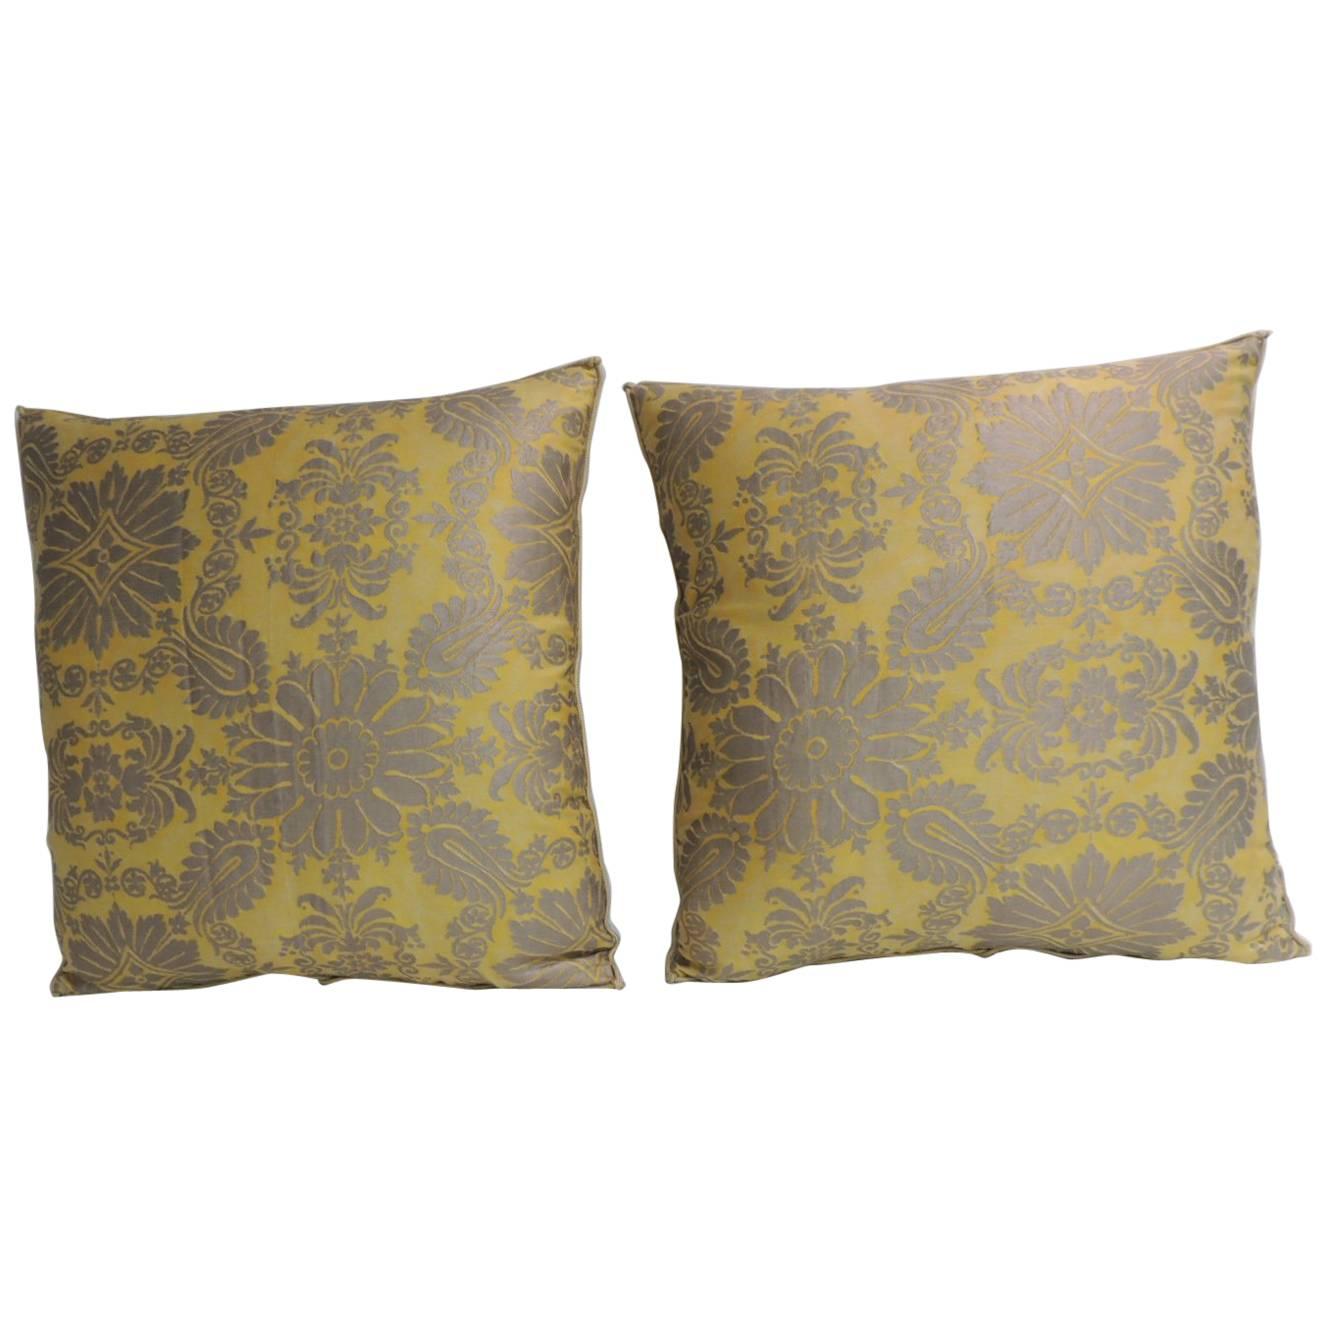 Pair of Vintage Yellow and Gold Floral Fortuny Decorative Pillows